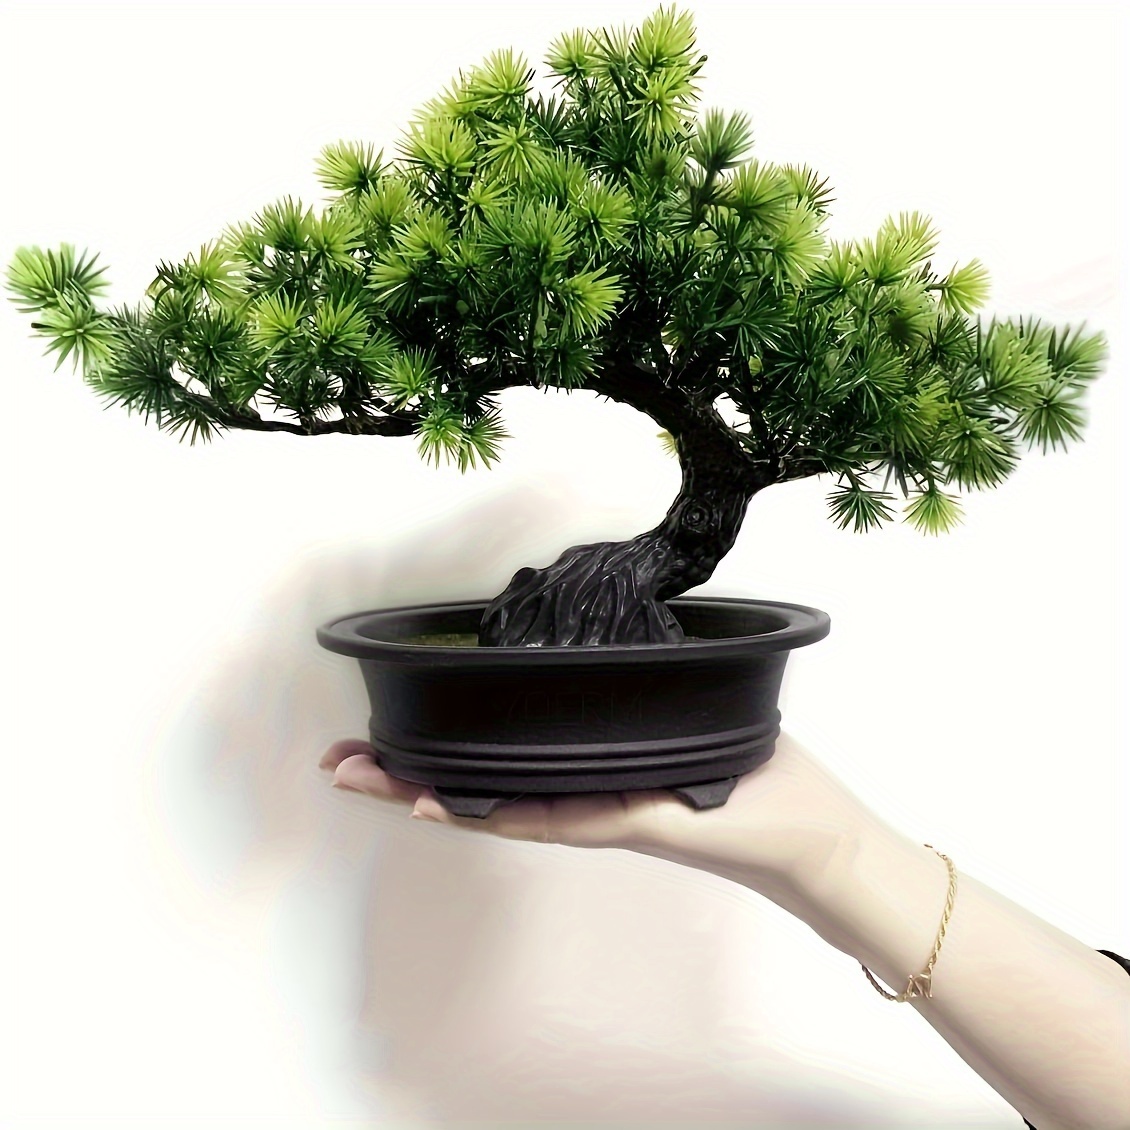 

Charming 9.5" Artificial Pine - Perfect For Home & Office Decor, Zen Garden, Bookshelf Accent, And Farmhouse Style